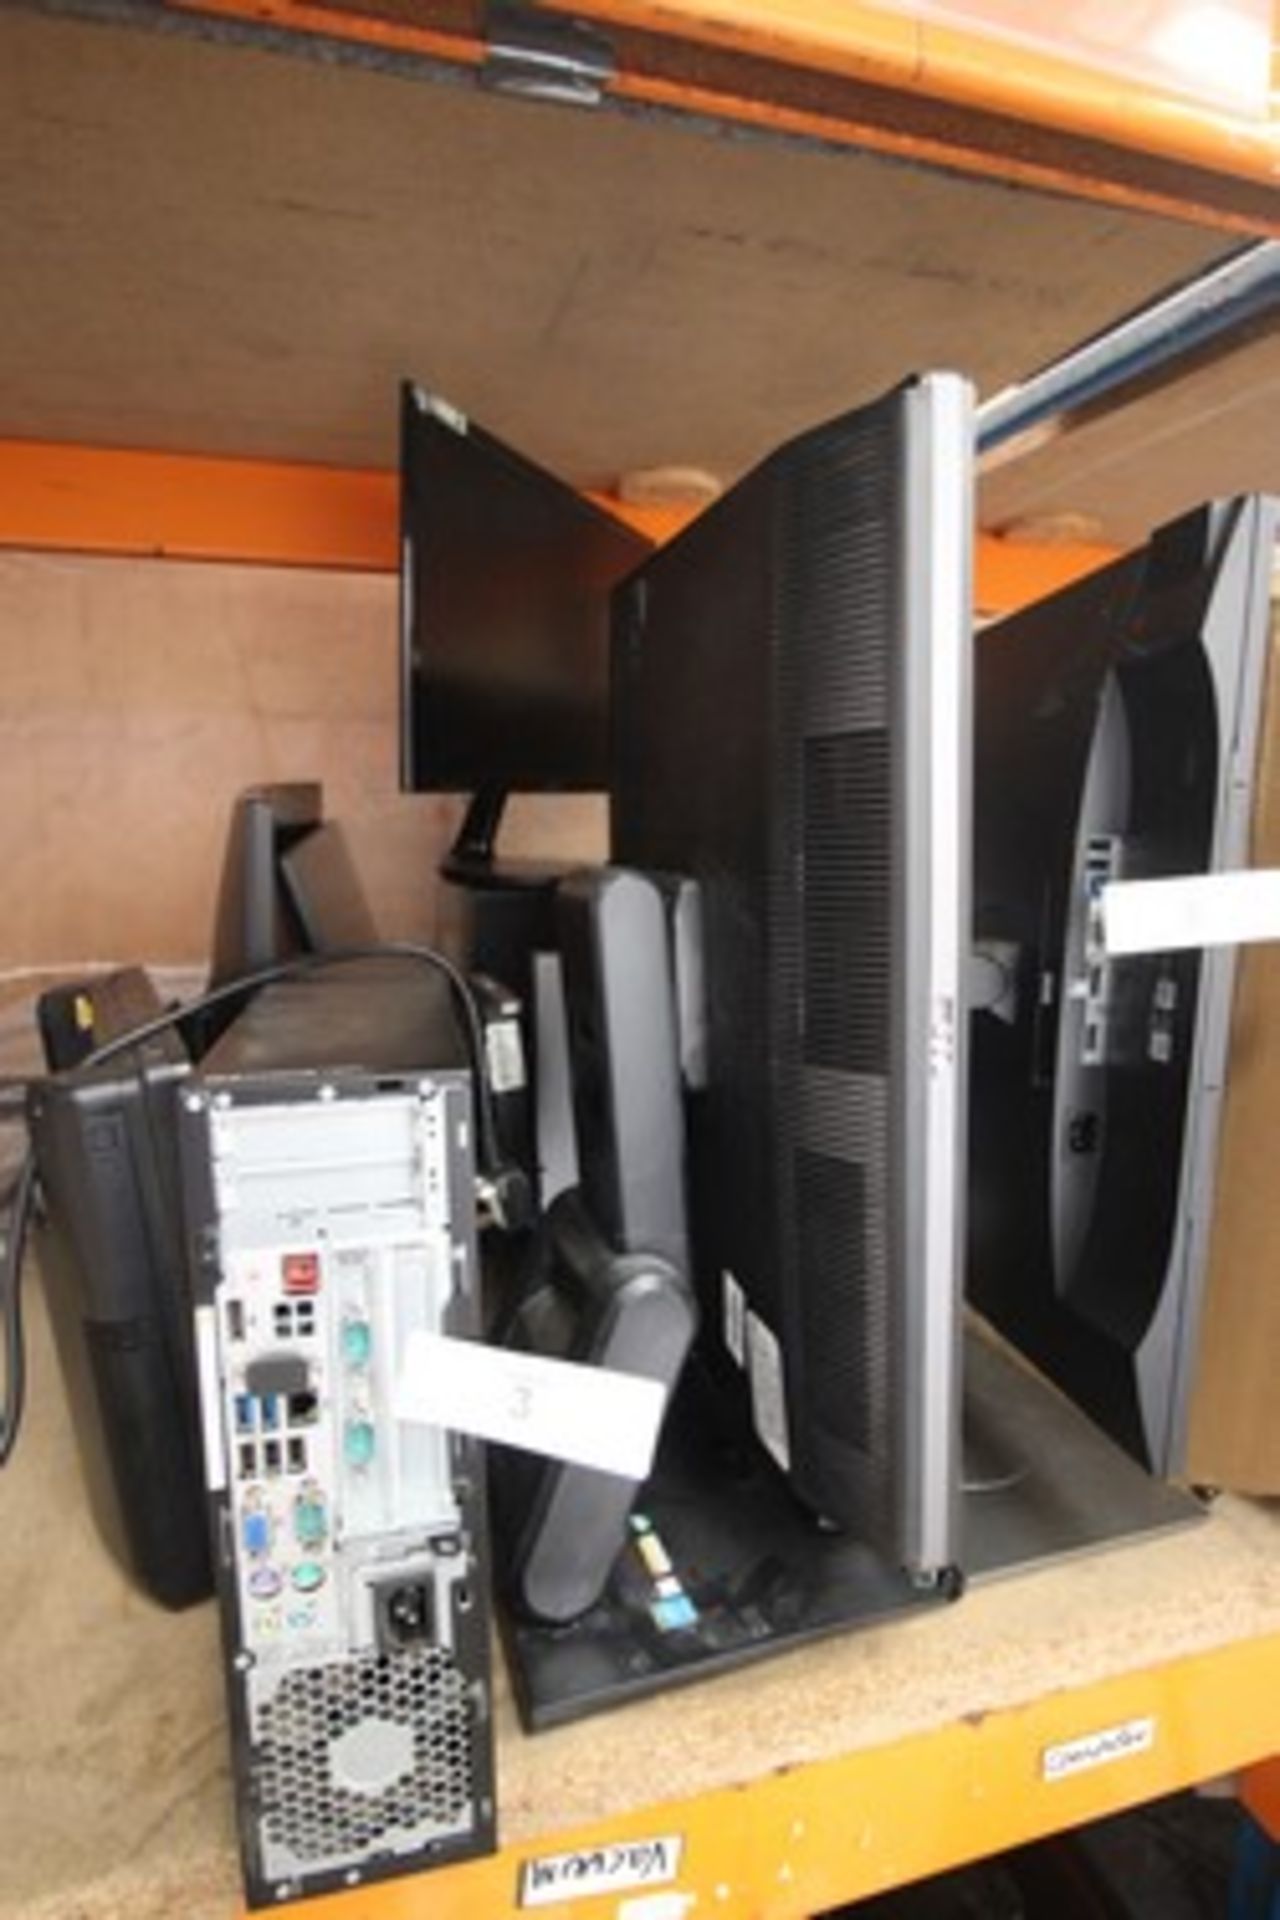 A selection of computer equipment, including monitors and PC cases, keyboards, etc., all